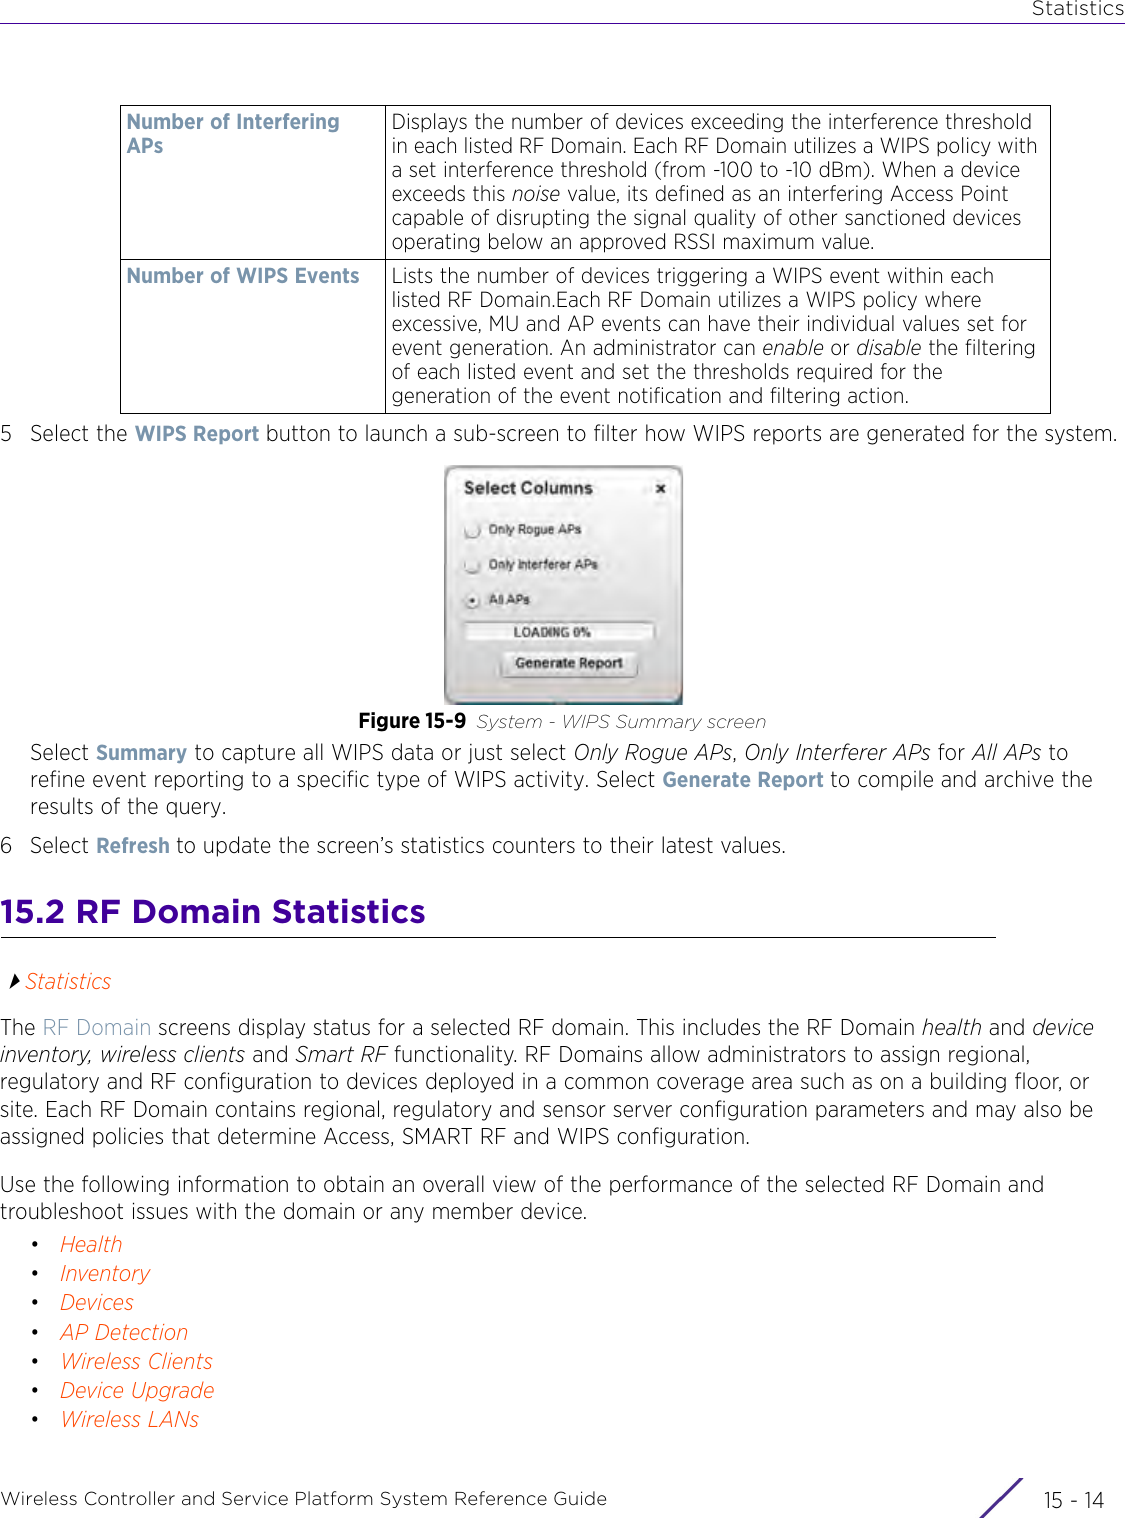 StatisticsWireless Controller and Service Platform System Reference Guide  15 - 145 Select the WIPS Report button to launch a sub-screen to filter how WIPS reports are generated for the system.Figure 15-9 System - WIPS Summary screenSelect Summary to capture all WIPS data or just select Only Rogue APs, Only Interferer APs for All APs to refine event reporting to a specific type of WIPS activity. Select Generate Report to compile and archive the results of the query.6Select Refresh to update the screen’s statistics counters to their latest values. 15.2 RF Domain StatisticsStatisticsThe RF Domain screens display status for a selected RF domain. This includes the RF Domain health and device inventory, wireless clients and Smart RF functionality. RF Domains allow administrators to assign regional, regulatory and RF configuration to devices deployed in a common coverage area such as on a building floor, or site. Each RF Domain contains regional, regulatory and sensor server configuration parameters and may also be assigned policies that determine Access, SMART RF and WIPS configuration. Use the following information to obtain an overall view of the performance of the selected RF Domain and troubleshoot issues with the domain or any member device.•Health•Inventory•Devices•AP Detection•Wireless Clients•Device Upgrade•Wireless LANsNumber of Interfering APsDisplays the number of devices exceeding the interference threshold in each listed RF Domain. Each RF Domain utilizes a WIPS policy with a set interference threshold (from -100 to -10 dBm). When a device exceeds this noise value, its defined as an interfering Access Point capable of disrupting the signal quality of other sanctioned devices operating below an approved RSSI maximum value. Number of WIPS Events Lists the number of devices triggering a WIPS event within each listed RF Domain.Each RF Domain utilizes a WIPS policy where excessive, MU and AP events can have their individual values set for event generation. An administrator can enable or disable the filtering of each listed event and set the thresholds required for the generation of the event notification and filtering action. 